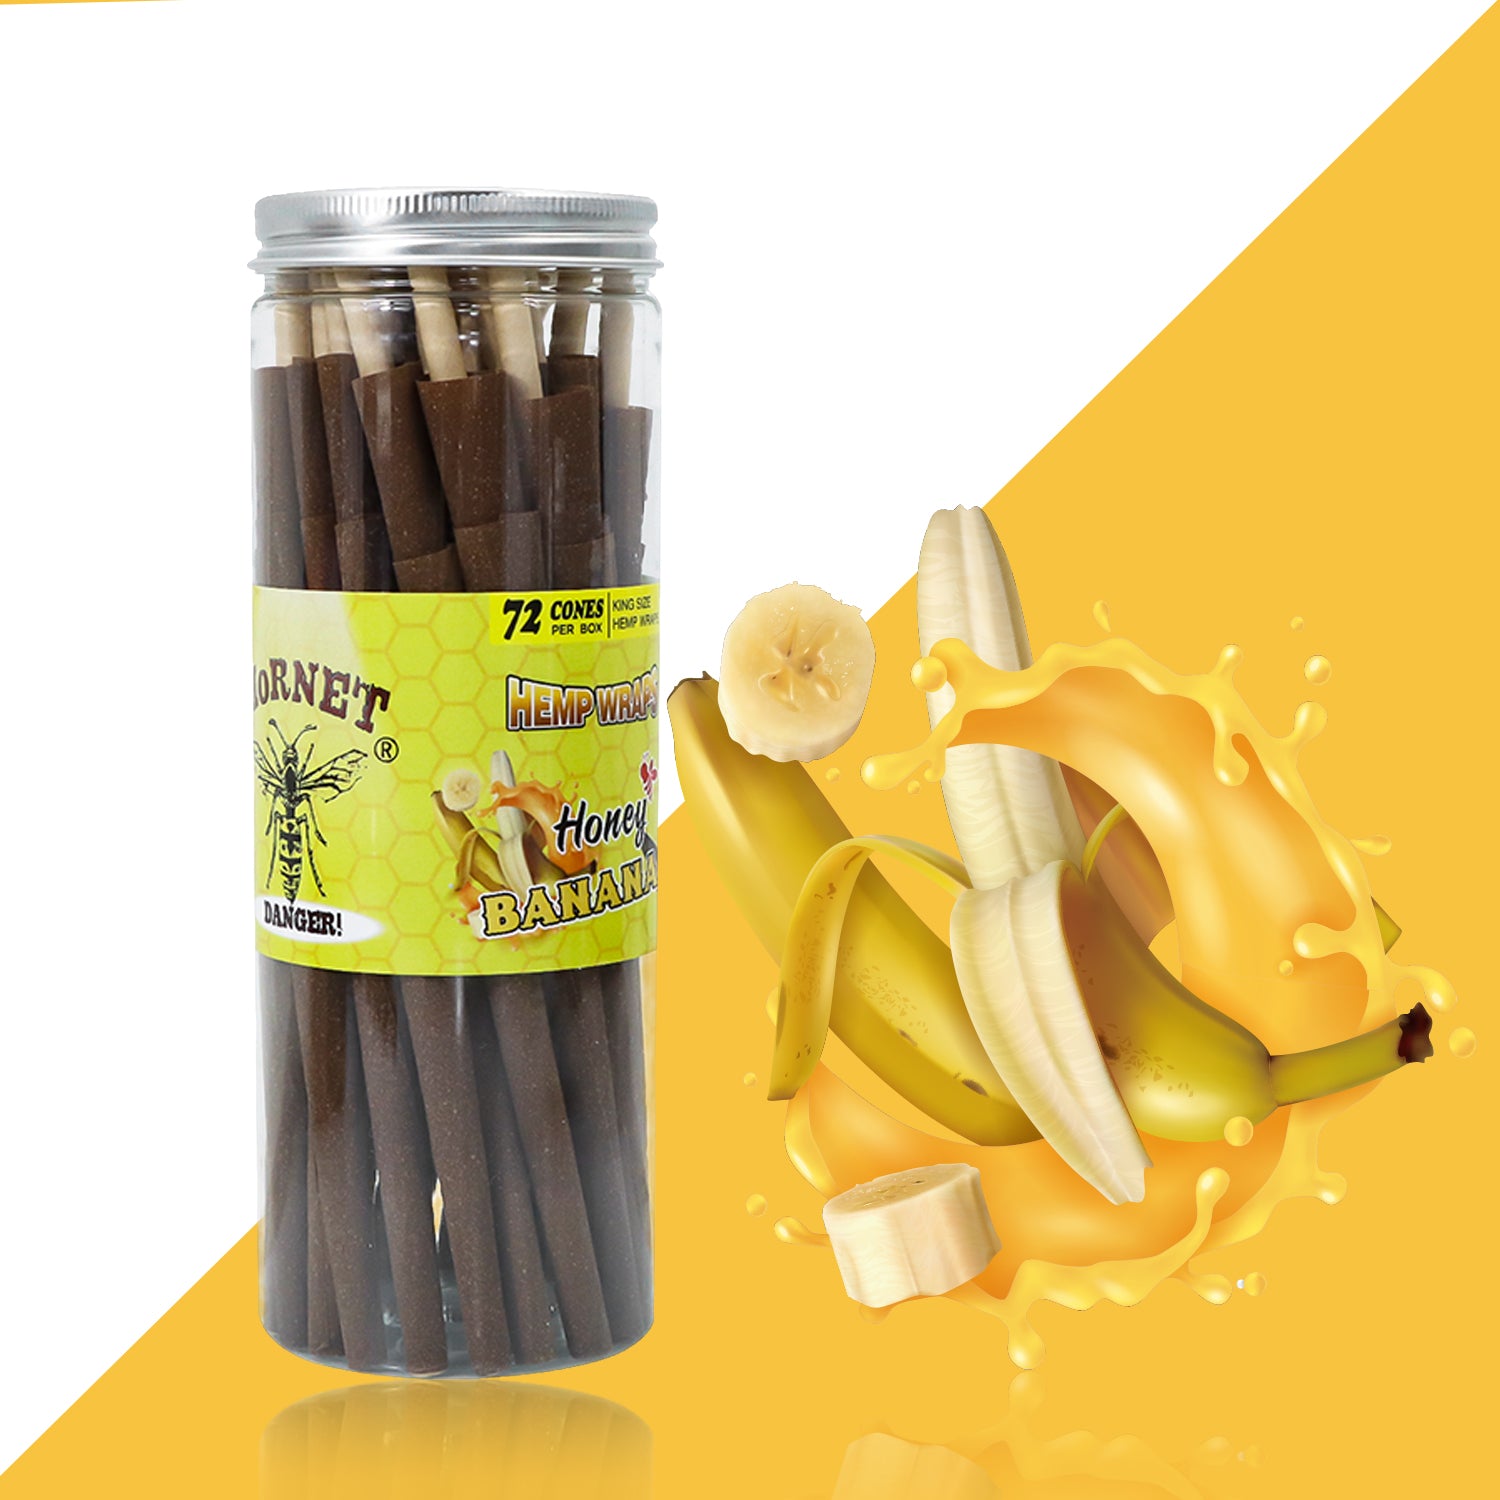 HORNET Banana Flavored Brown Pre Rolled Cones, King Size Pre Rolled Rolling Paper with tips, Slow Burning Rolling Cones & load, 72 PCS / Jar